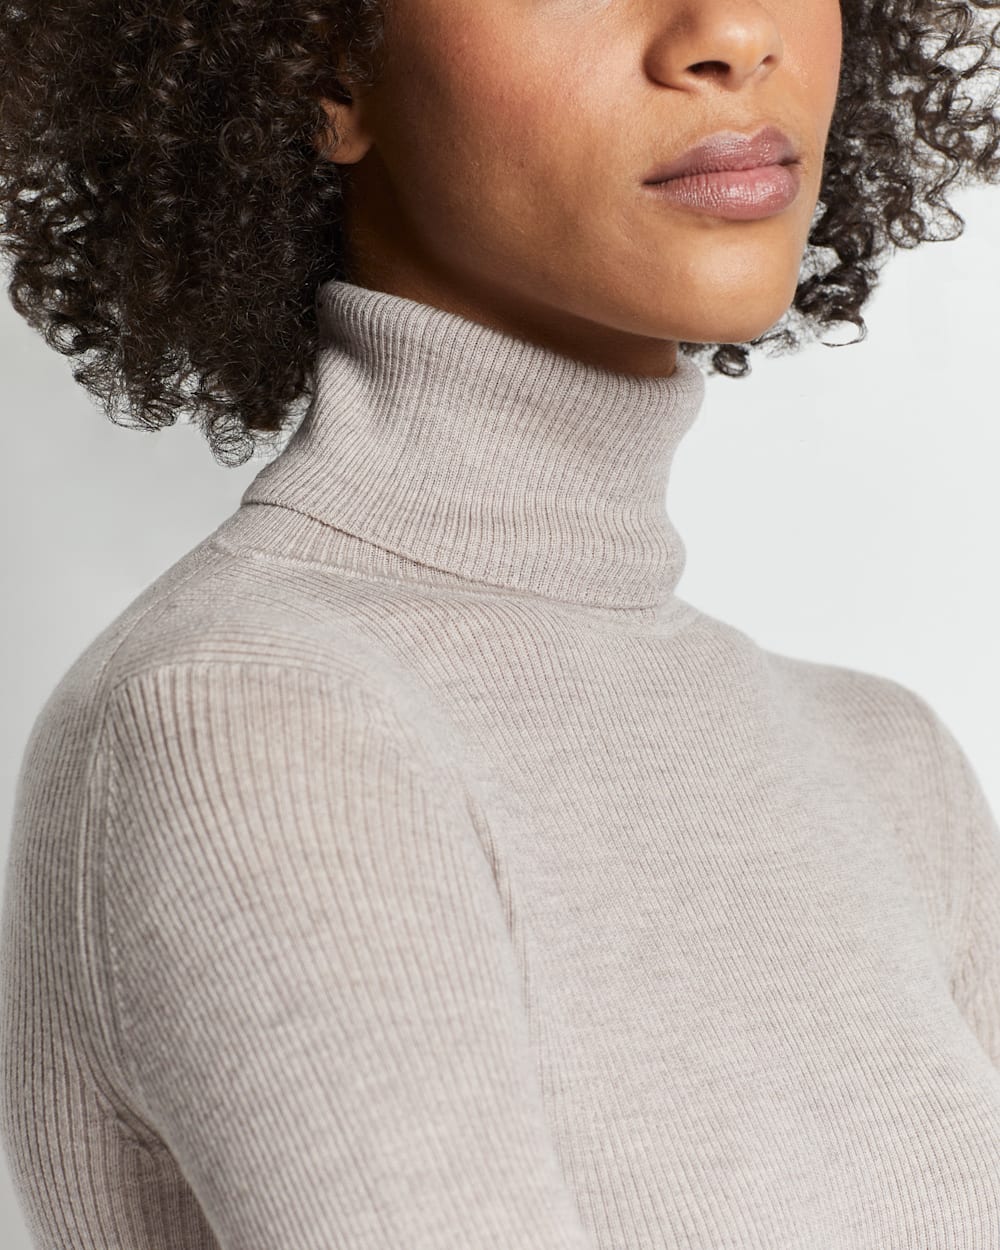 ALTERNATE VIEW OF WOMEN'S RIB MERINO TURTLENECK IN SOFT TAUPE HEATHER image number 2